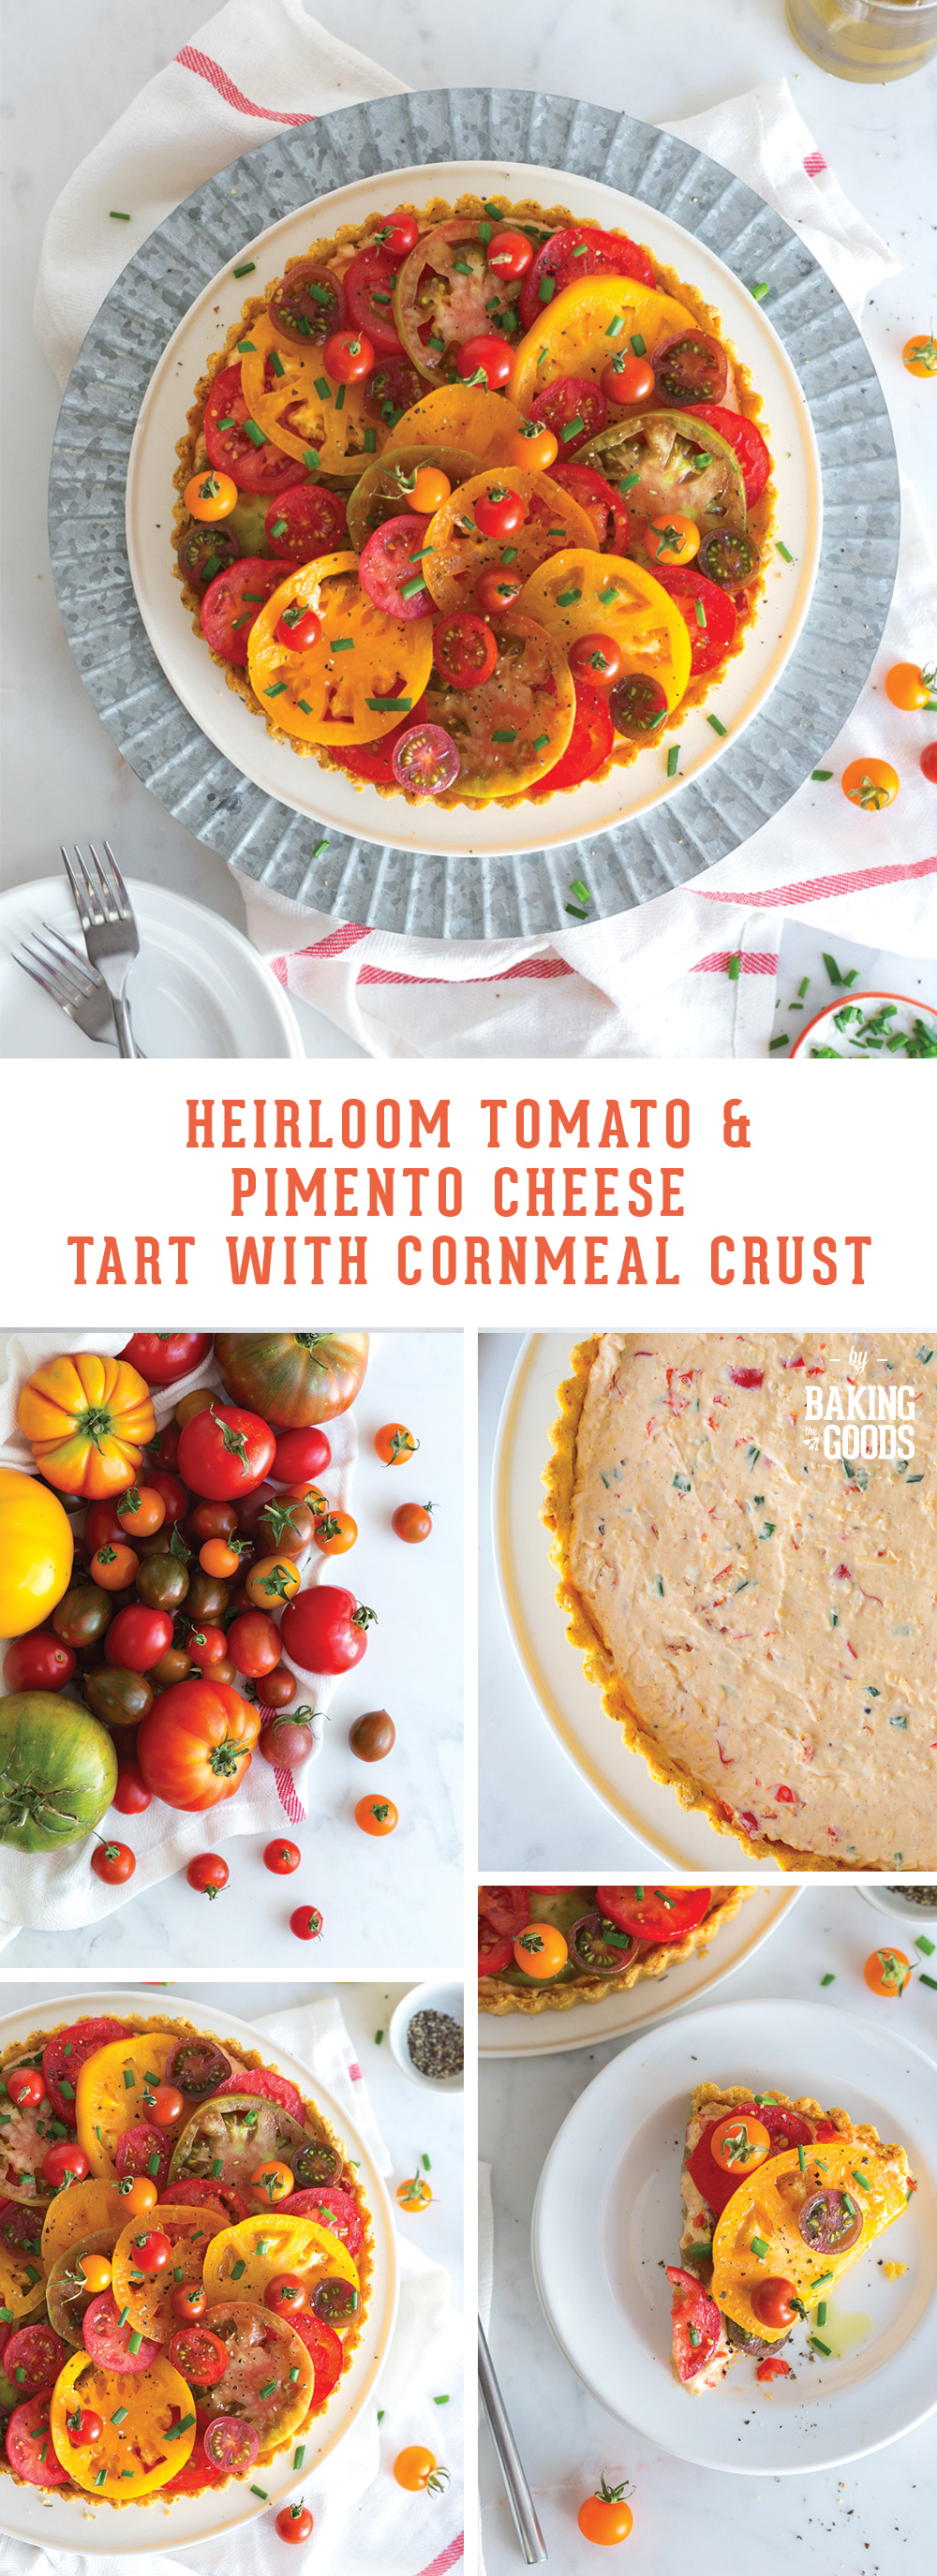 Heirloom Tomato and Pimento Cheese Tart with Cornmeal Crust by Baking The Goods